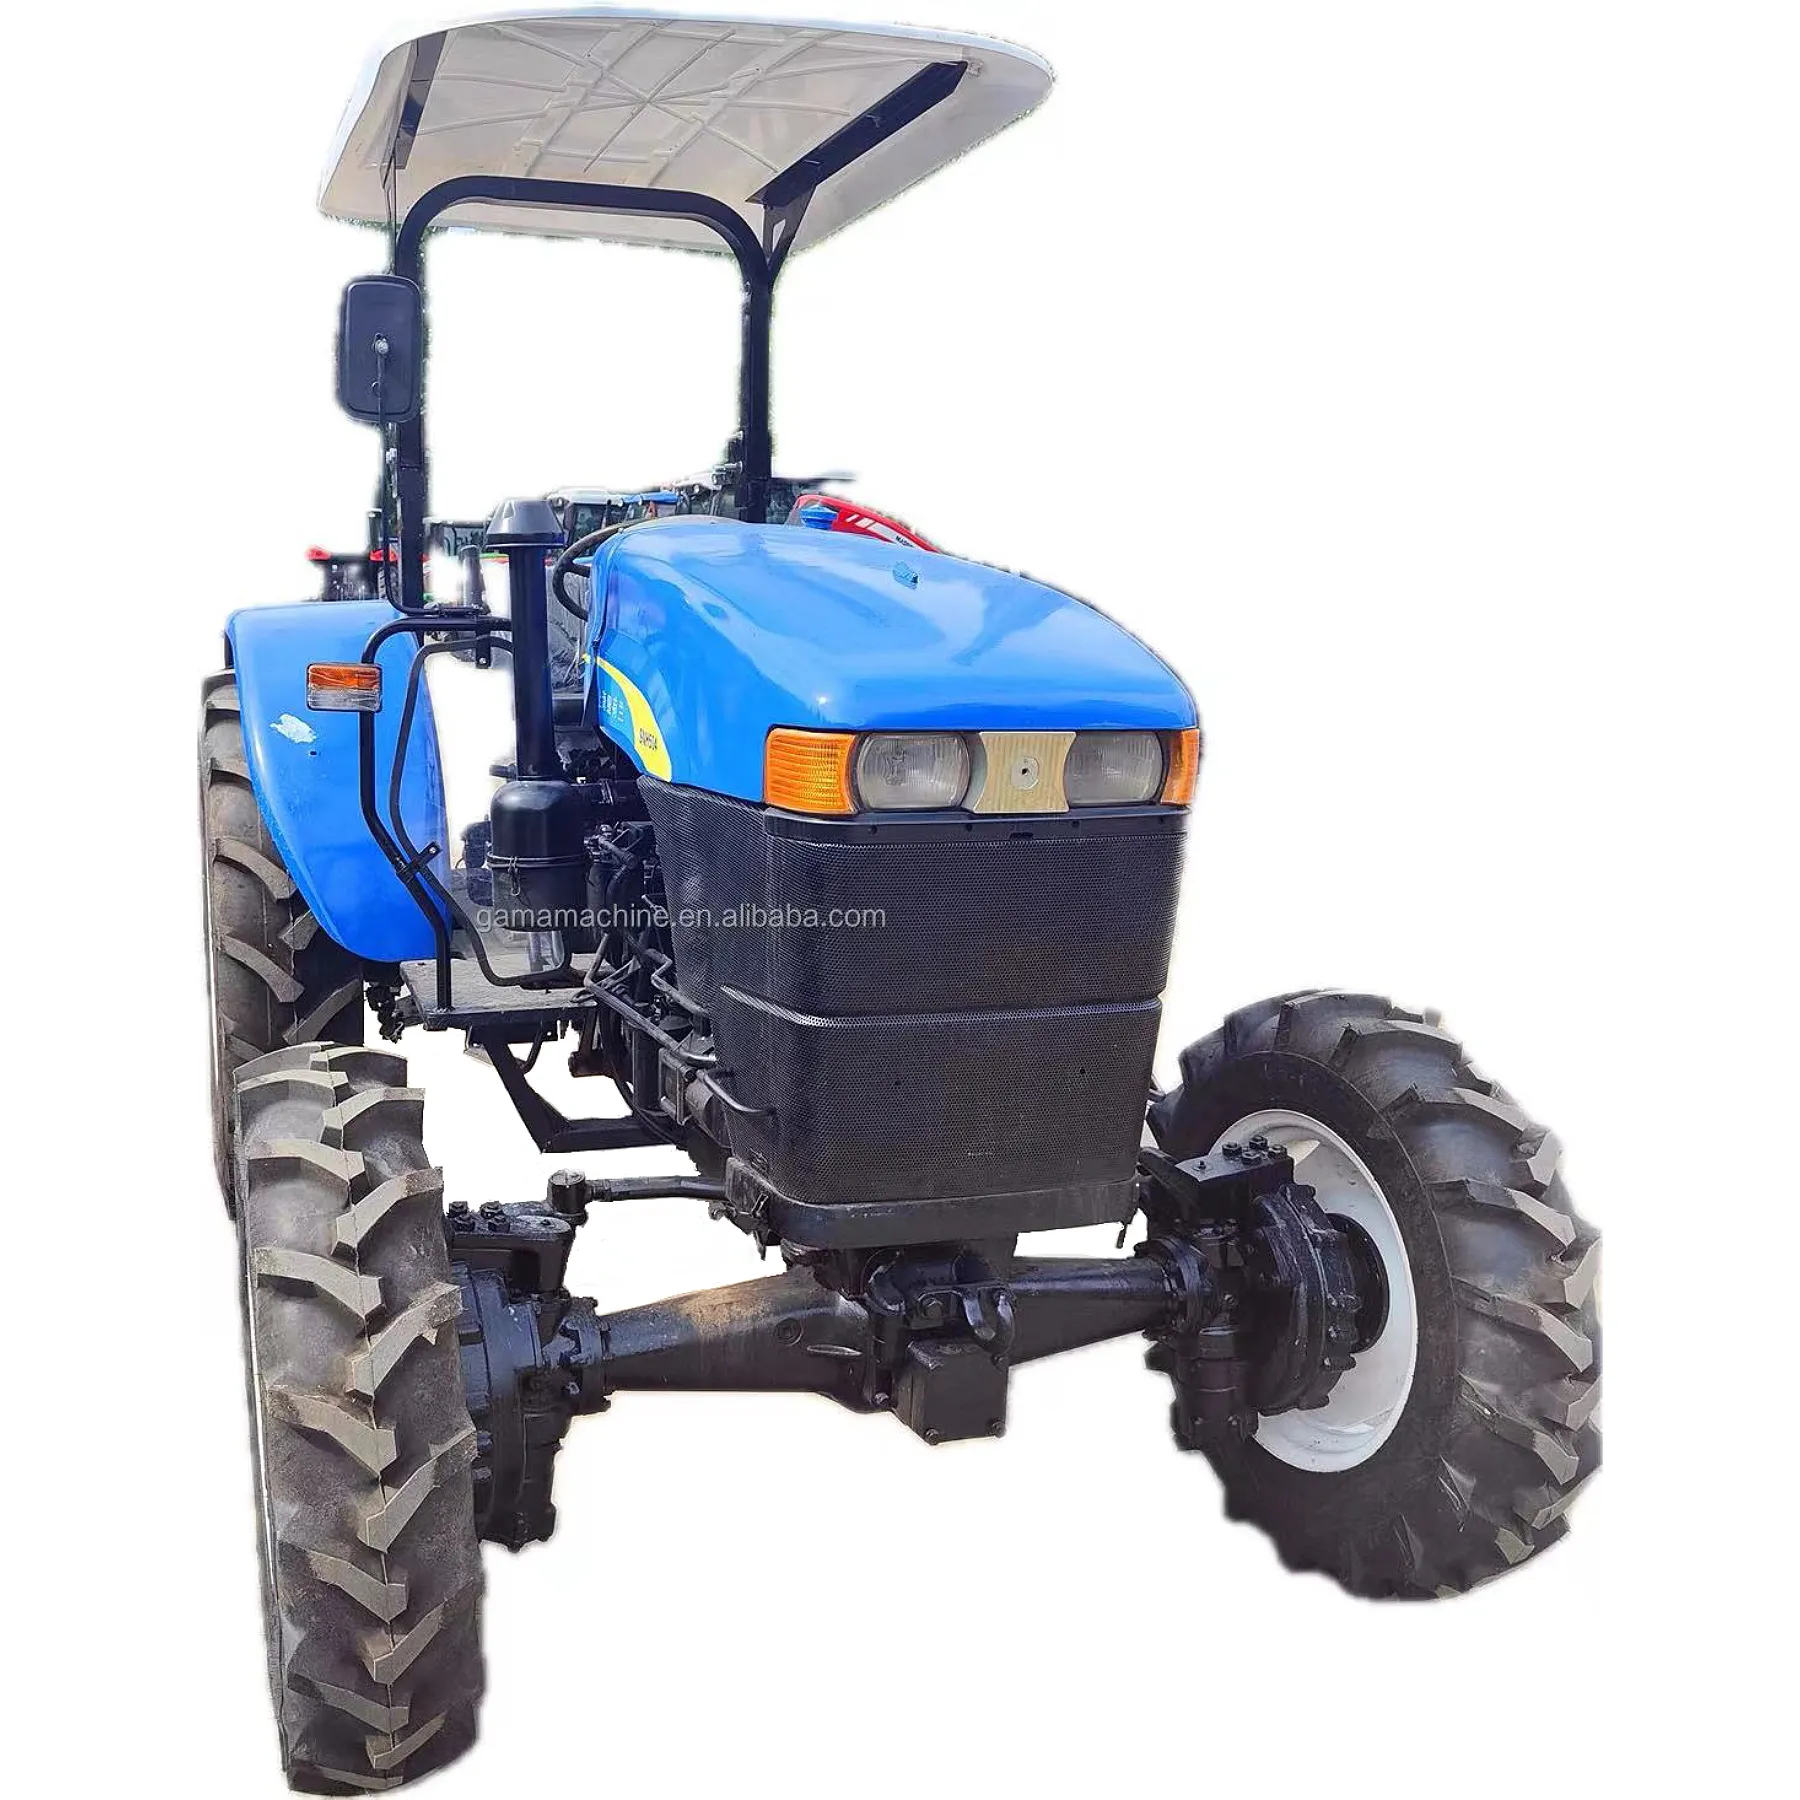 Hot selling NEW and HOLLAND 554 tractor farm for 4wd used mini tractors without CE certificate